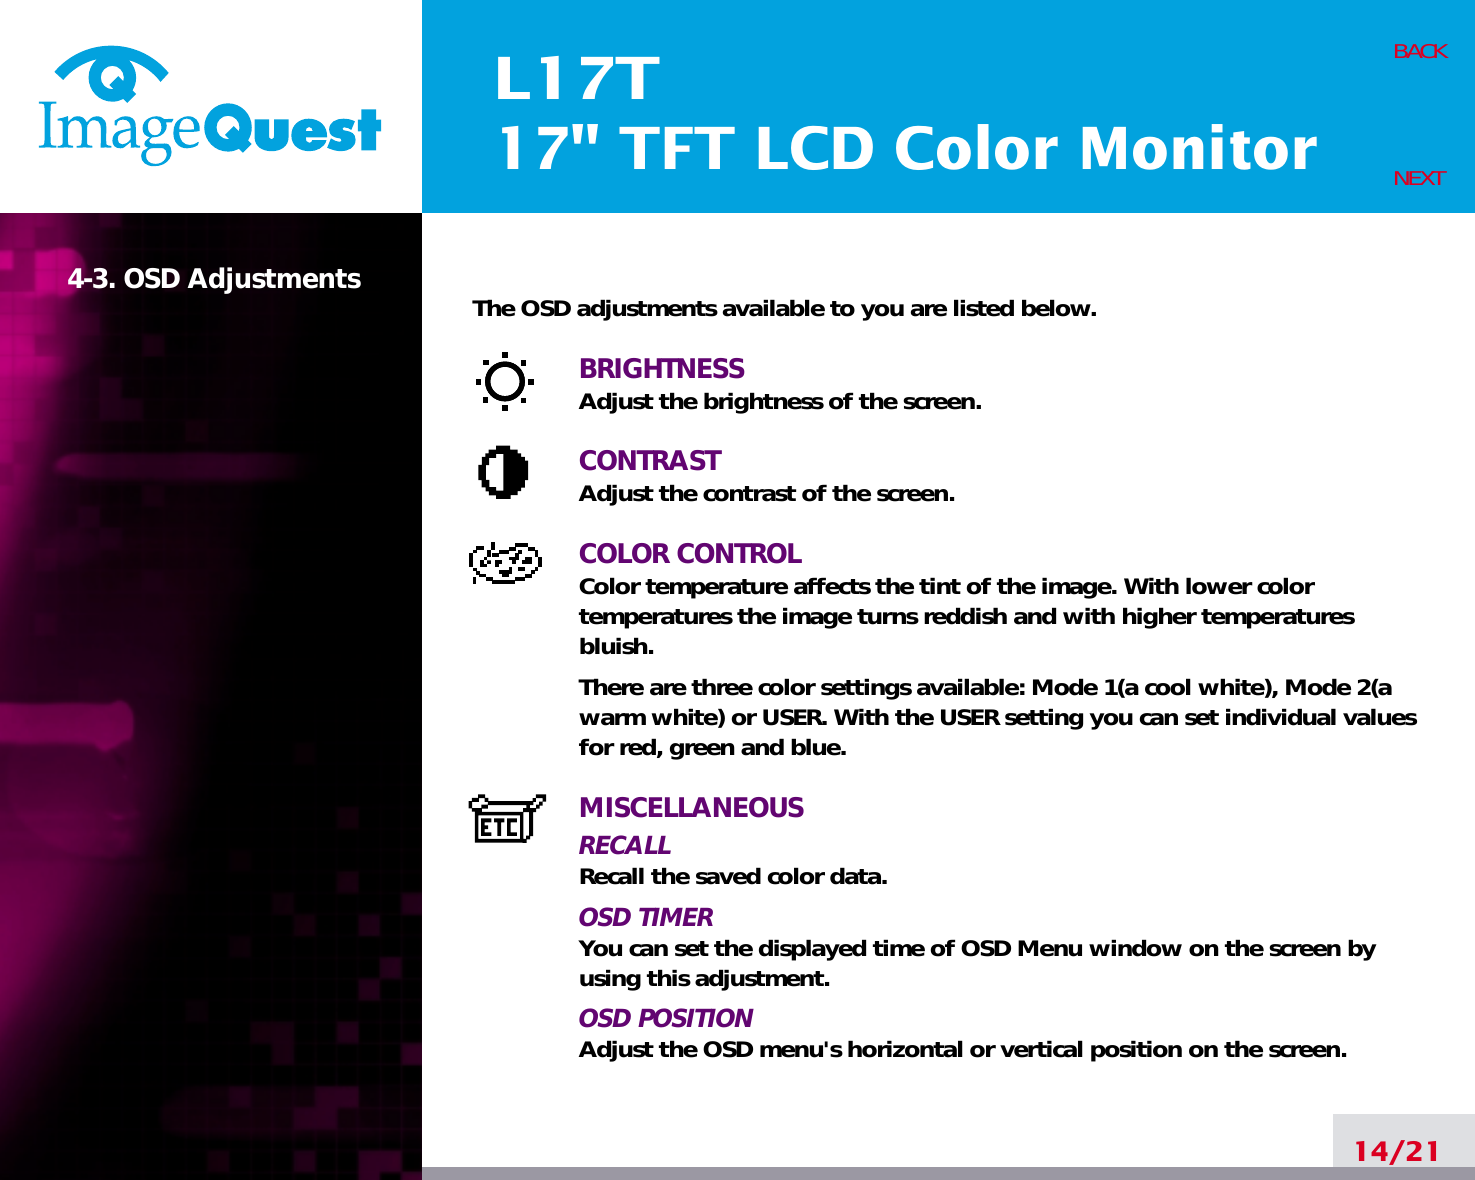 L17T17&quot; TFT LCD Color Monitor14/21BACKNEXT4-3. OSD Adjustments The OSD adjustments available to you are listed below.BRIGHTNESSAdjust the brightness of the screen.CONTRASTAdjust the contrast of the screen.COLOR CONTROLColor temperature affects the tint of the image. With lower color temperatures the image turns reddish and with higher temperatures bluish.There are three color settings available: Mode 1(a cool white), Mode 2(awarm white) or USER. With the USER setting you can set individual valuesfor red, green and blue.MISCELLANEOUSRECALL Recall the saved color data.OSD TIMERYou can set the displayed time of OSD Menu window on the screen byusing this adjustment.OSD POSITIONAdjust the OSD menu&apos;s horizontal or vertical position on the screen.